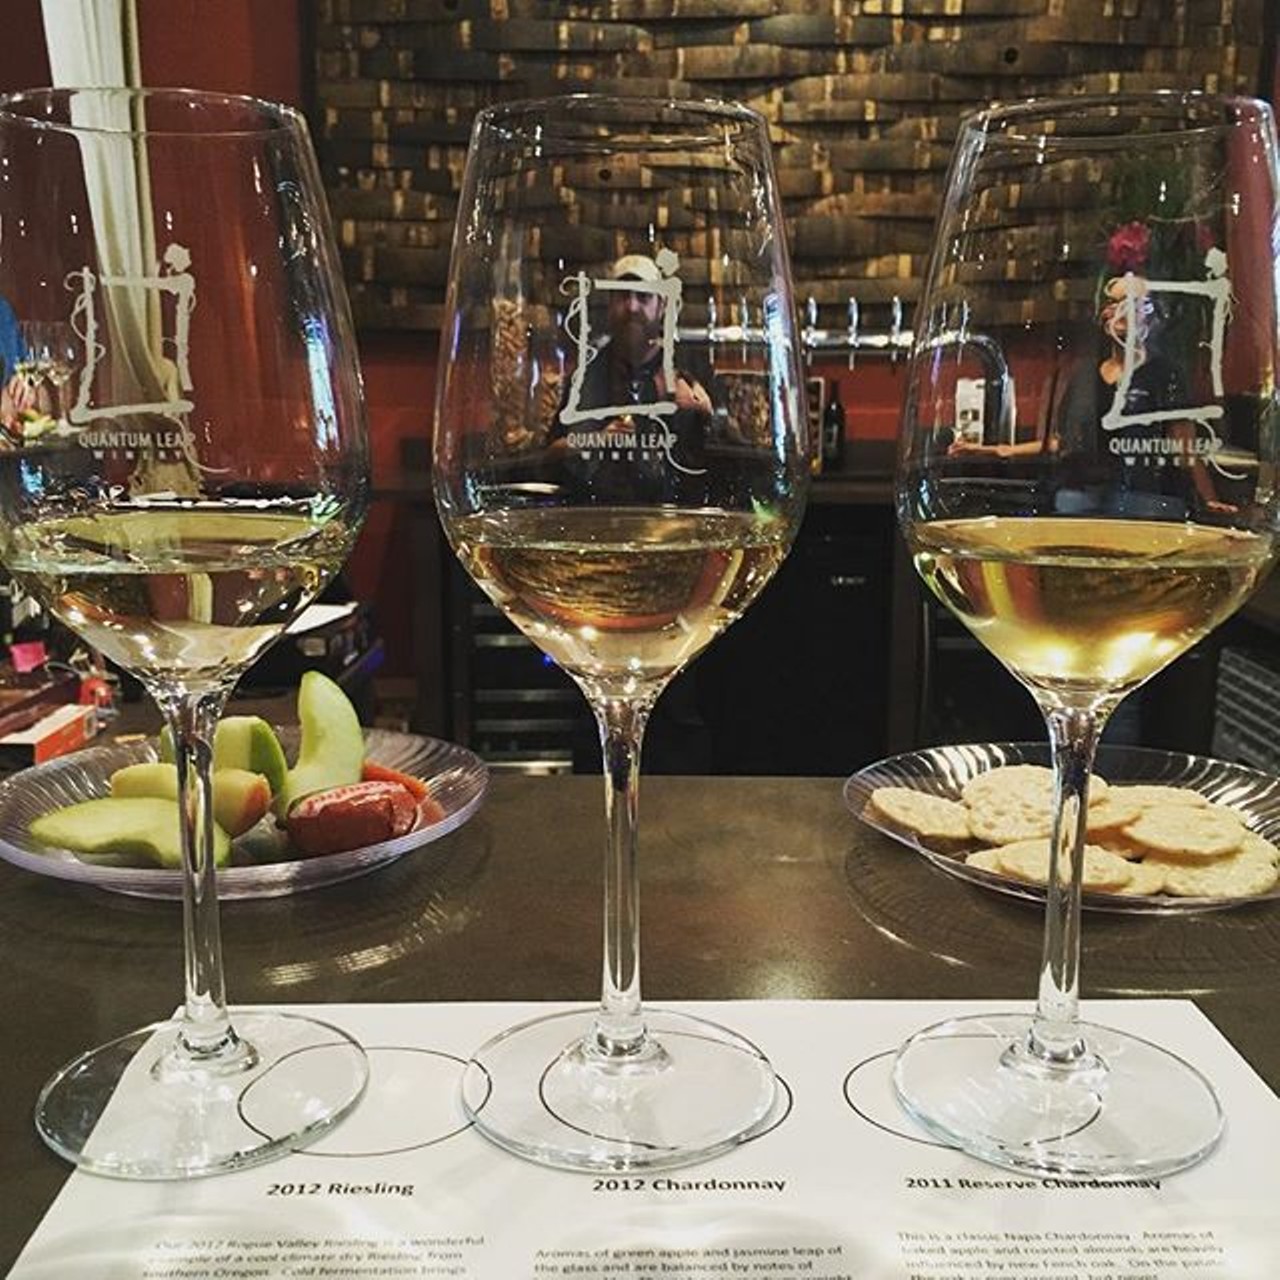 Sip on $5 wine flights at Quantum Leap 
1312 Wilfred Drive Orlando, FL 32803,  407-730-3082
Did someone say day drinking? Quantum Leap has $5 wine flights if you feel like trying new drinks with some friends. 
Photo via elfrijole/Instagram